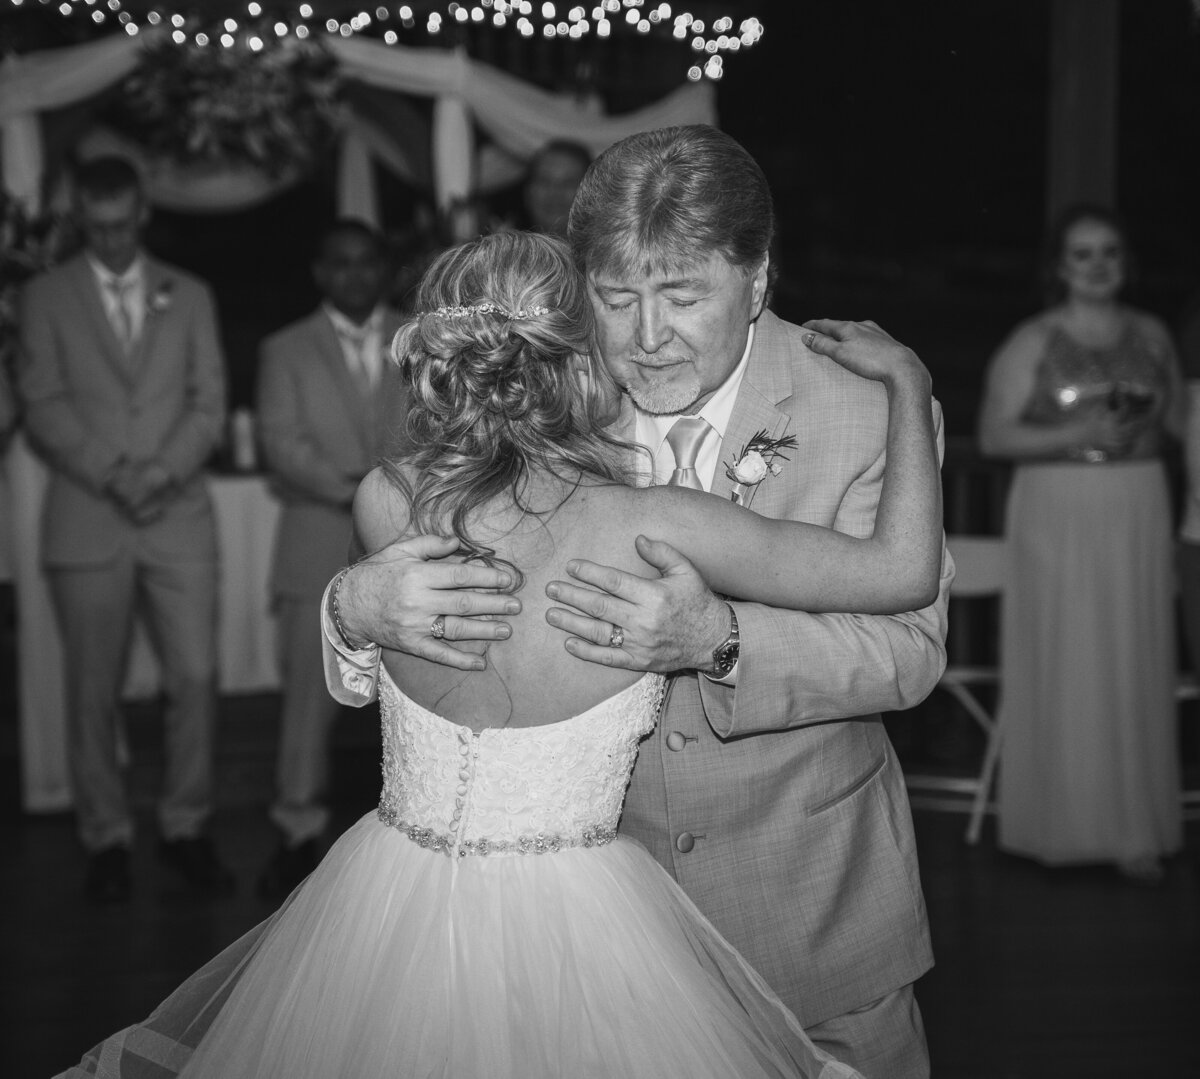 The bride, Amber, and her father share an emotional dance at Amber and Beau's wedding at Cheers Chalet in Lancaster, Ohio.